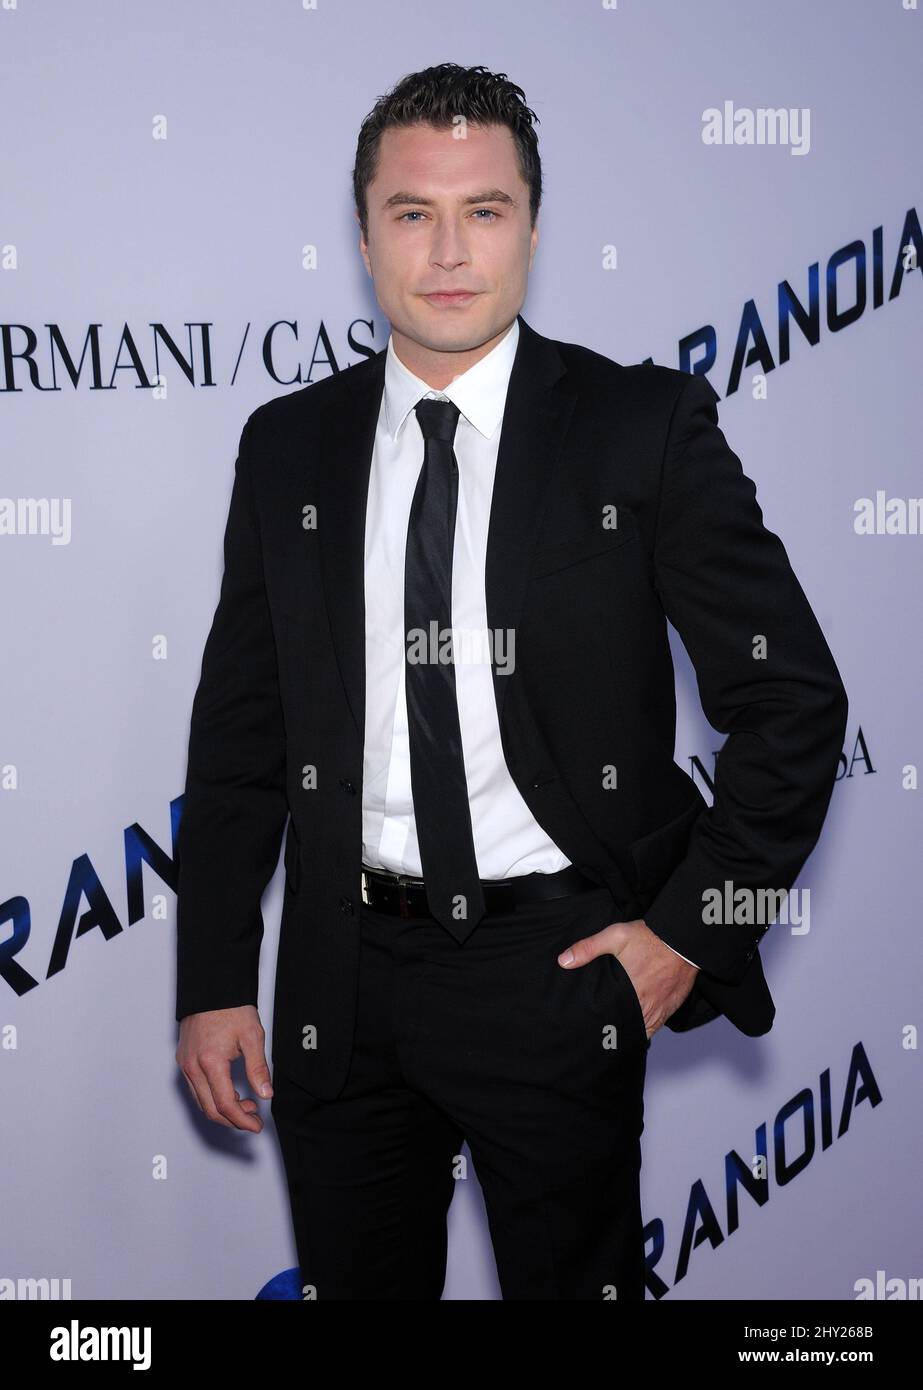 Kevin Ryan attends the 'Paranoia' US premiere held at the Directors Guild of America, Los Angeles. Stock Photo